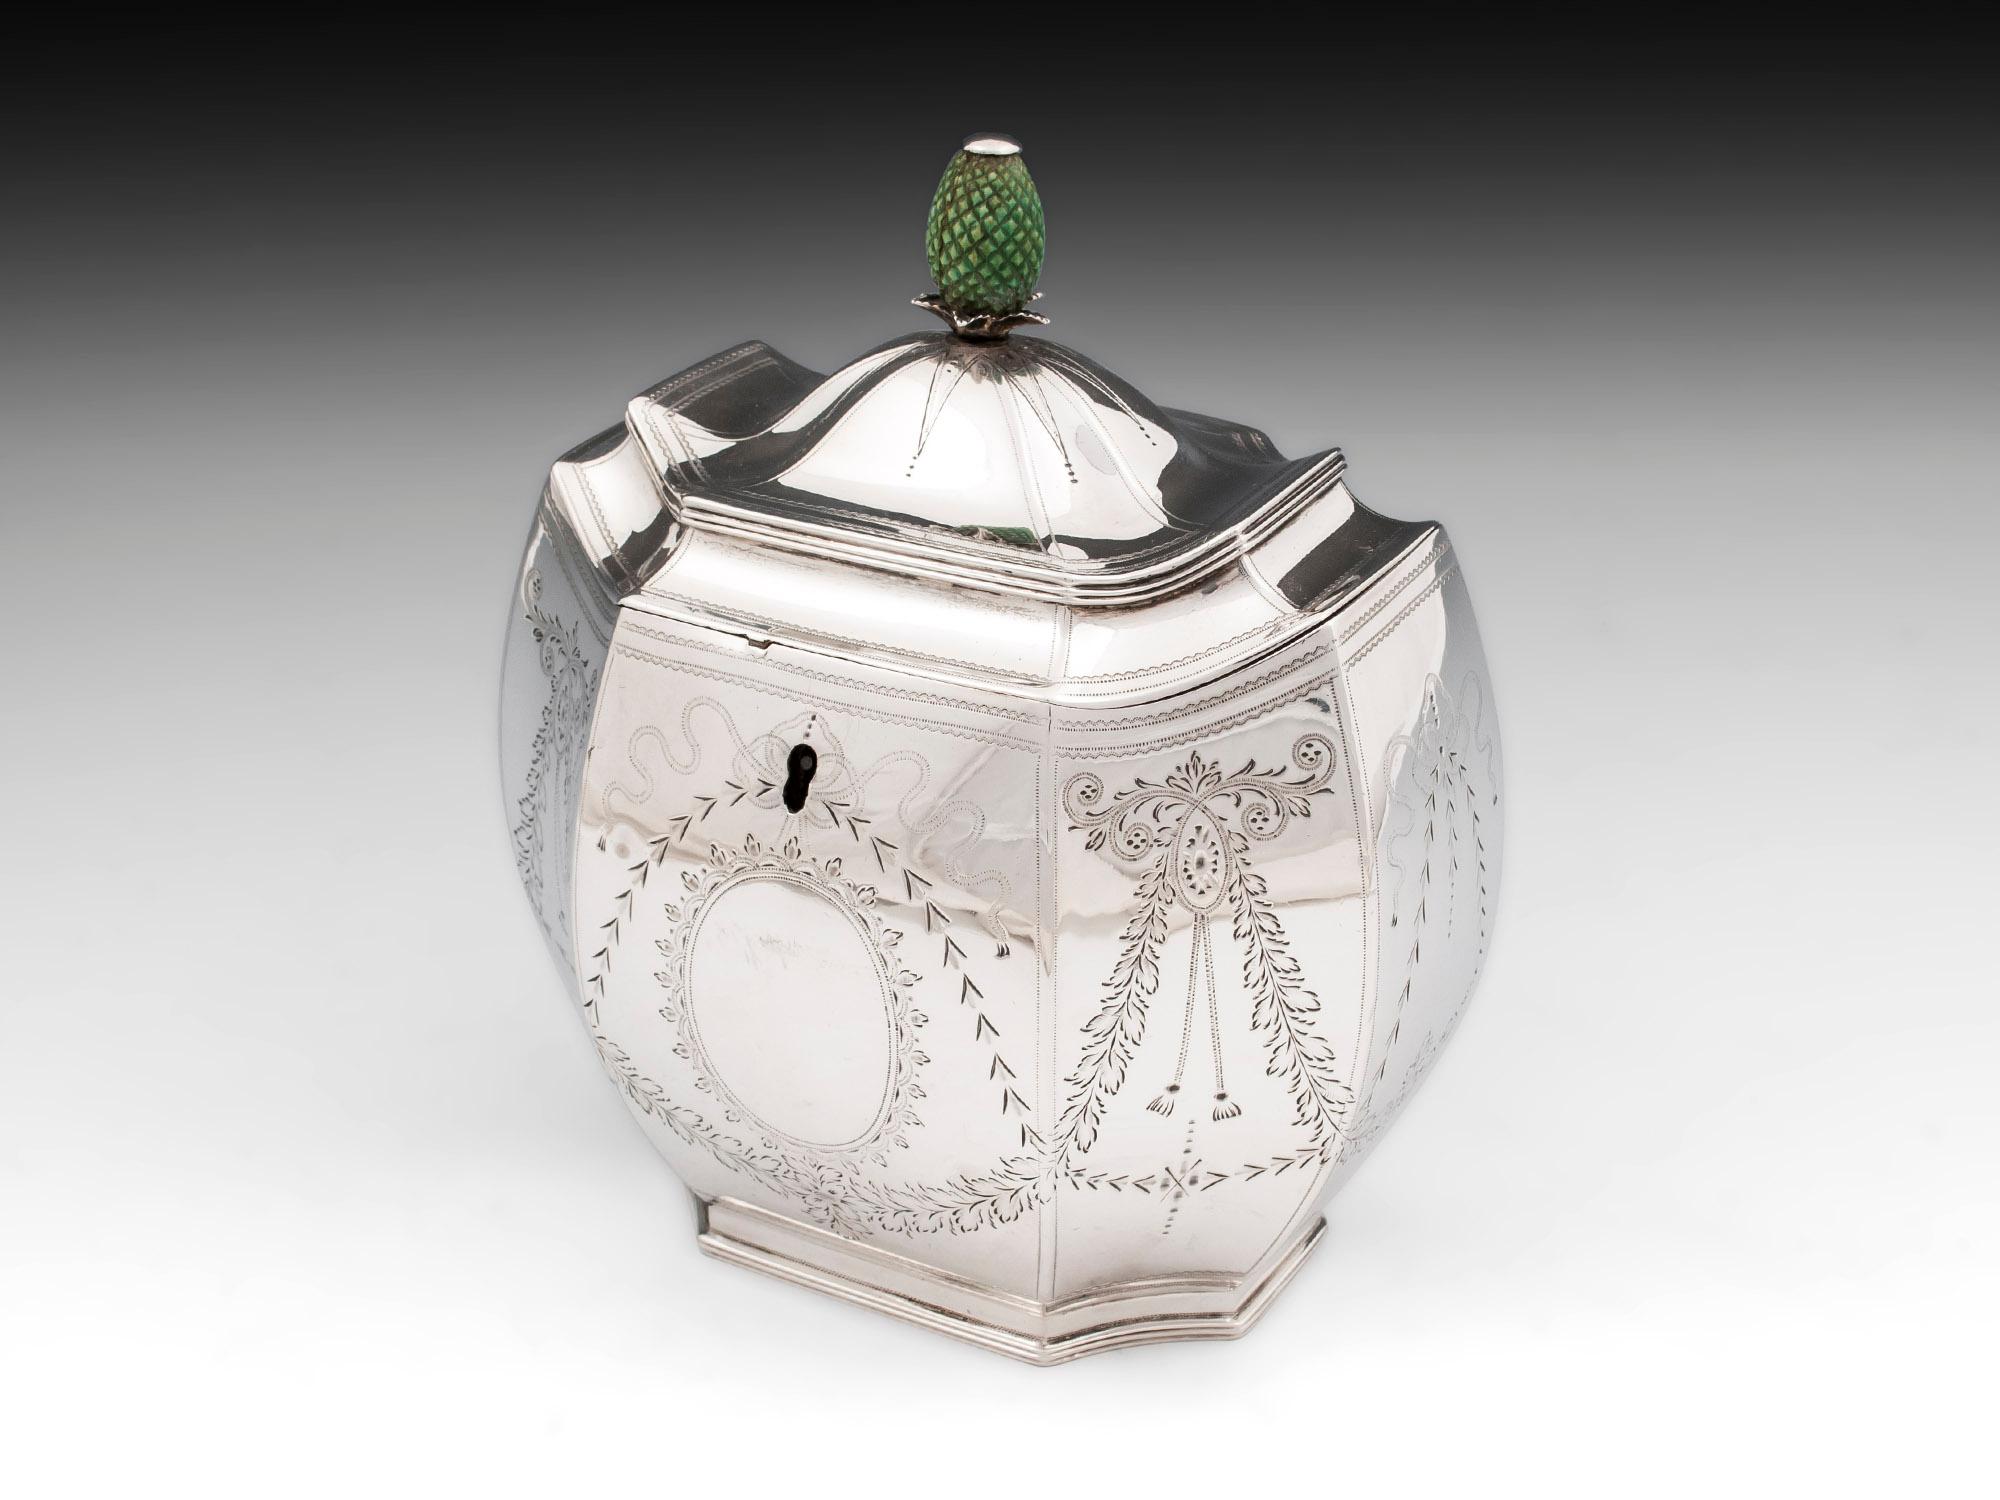 Antique Sterling Silver Tea Caddy, 18th Century In Good Condition For Sale In Northampton, United Kingdom